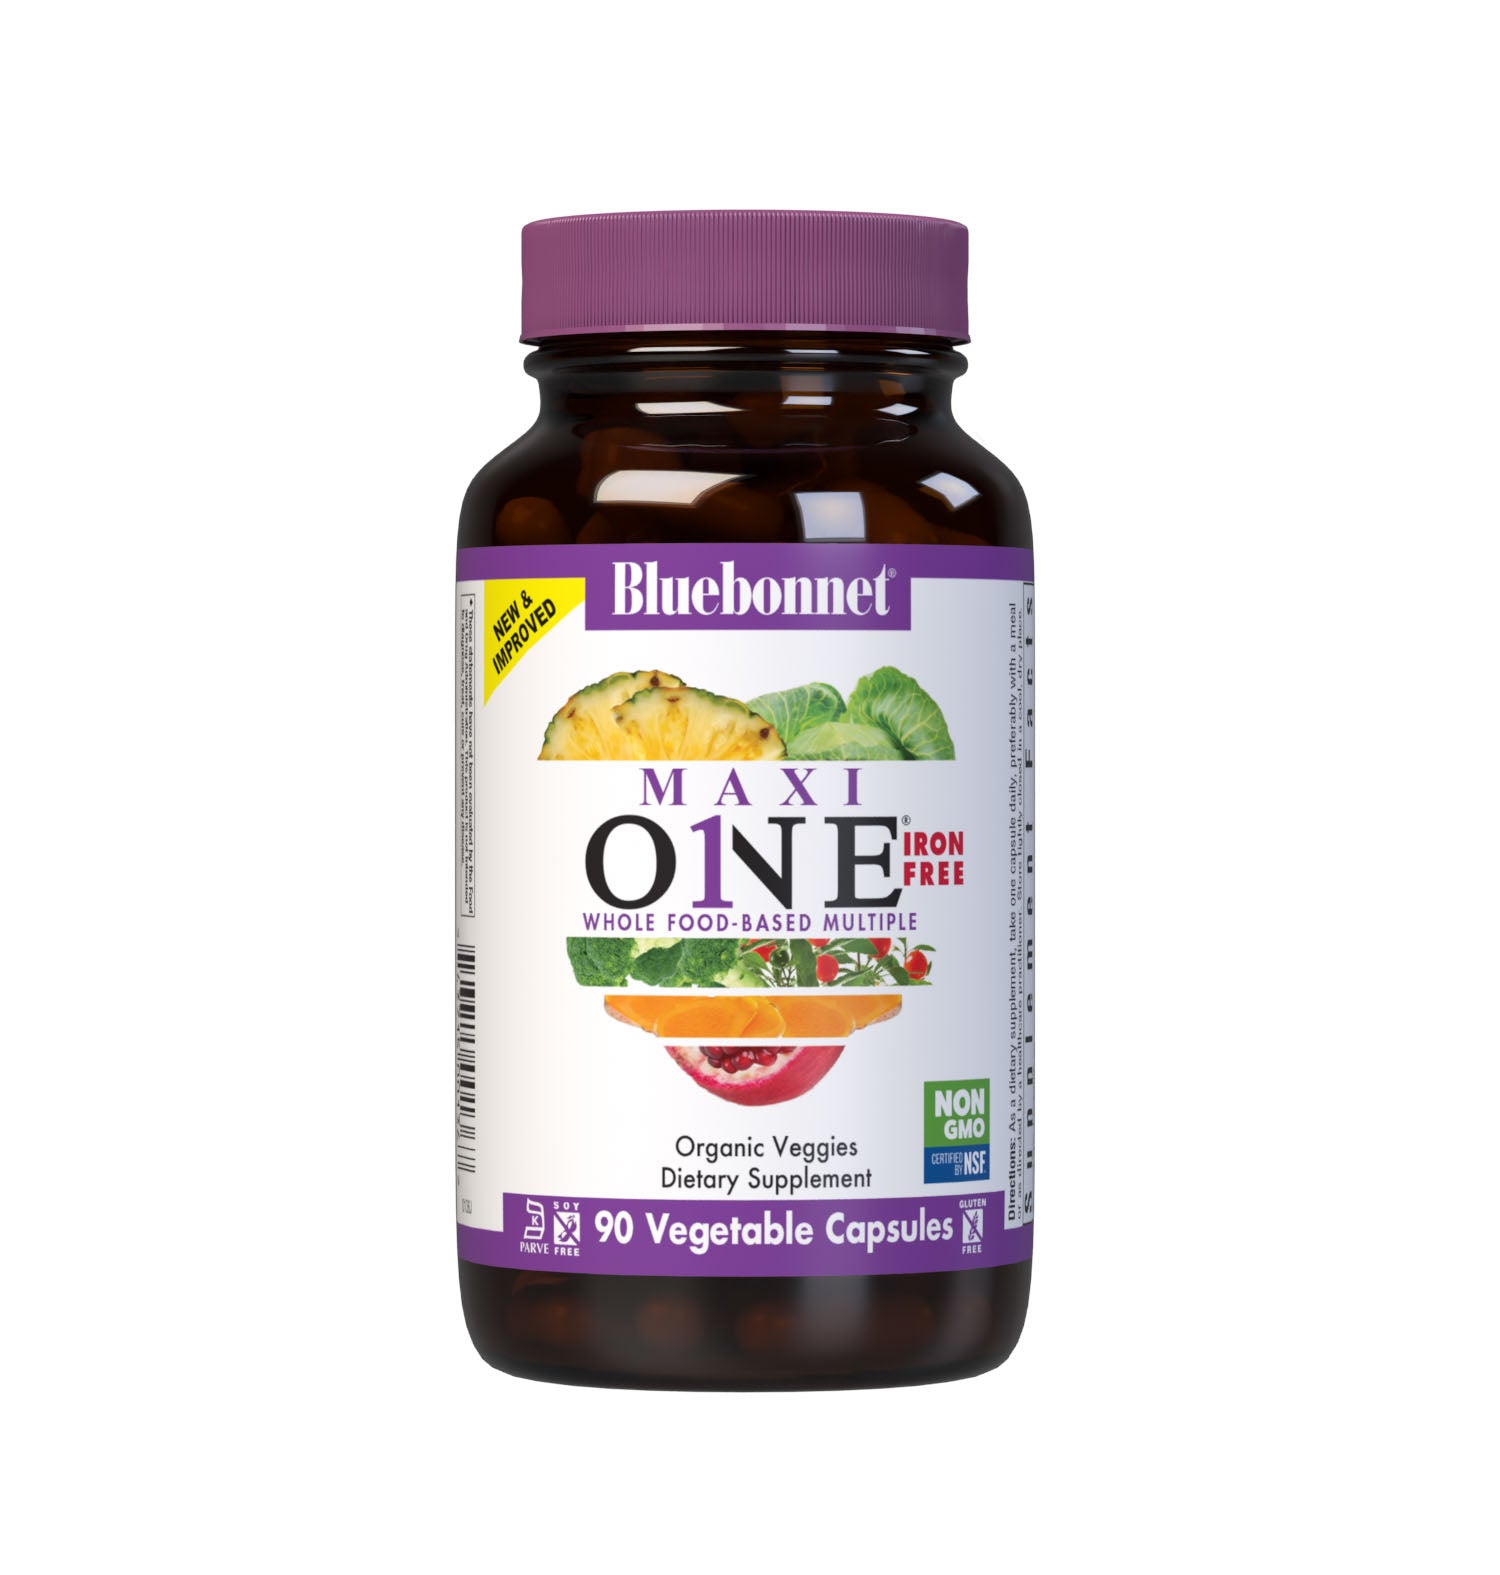 Bluebonnet’s Maxi ONE formula (Iron-Free) 90 vegetable capsules is a higher potency, single daily multivitamin and multimineral dietary supplement in a capsule and is formulated with highly efficient patented Albion chelated minerals, vitamin K2 from natto, select coenzyme B vitamins along with energy & vitality, organic whole food, and plant source enzyme blends. #size_90 count